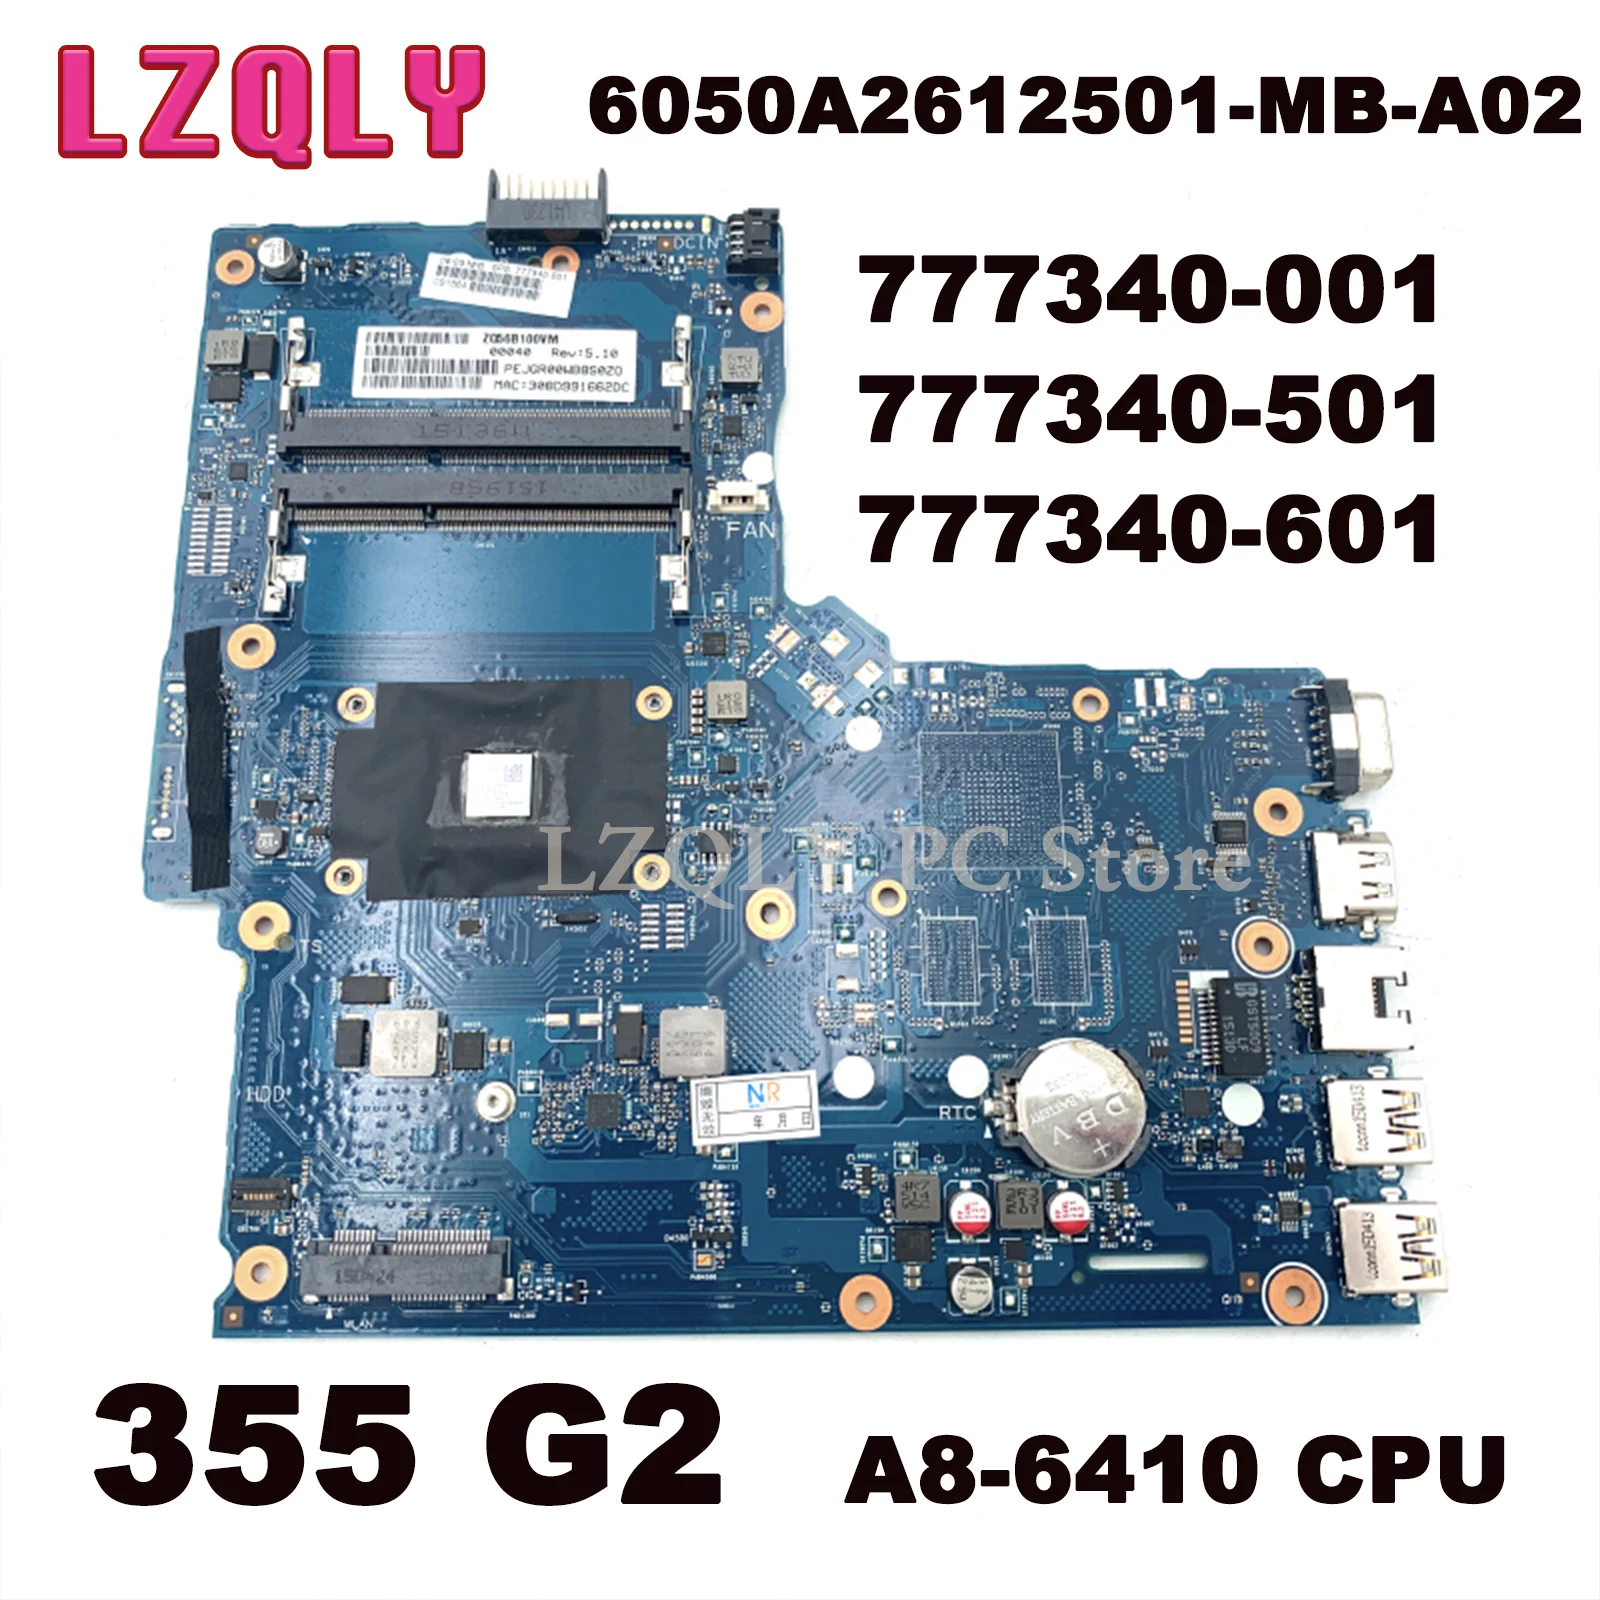 

LZQLY For HP 777340-001 777340-501 777340-601 6050A2612501-MB-A02 HP 355 G2 Laptop Motherboard A8-6410 CPU Main Board Fully Test